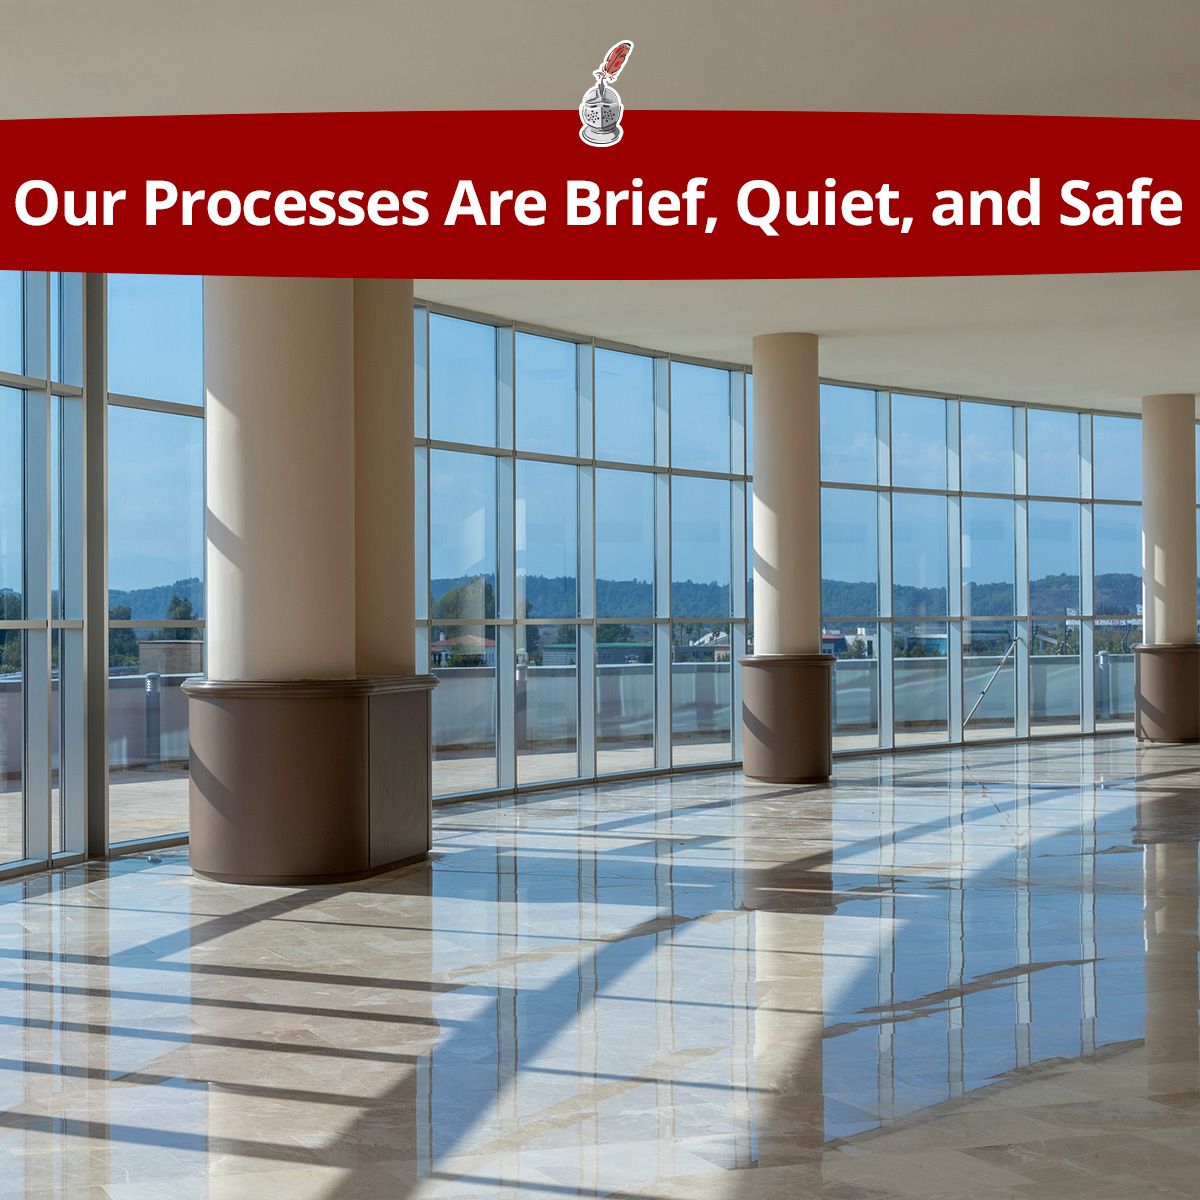 Our Processes Are Brief, Quiet, and Safe